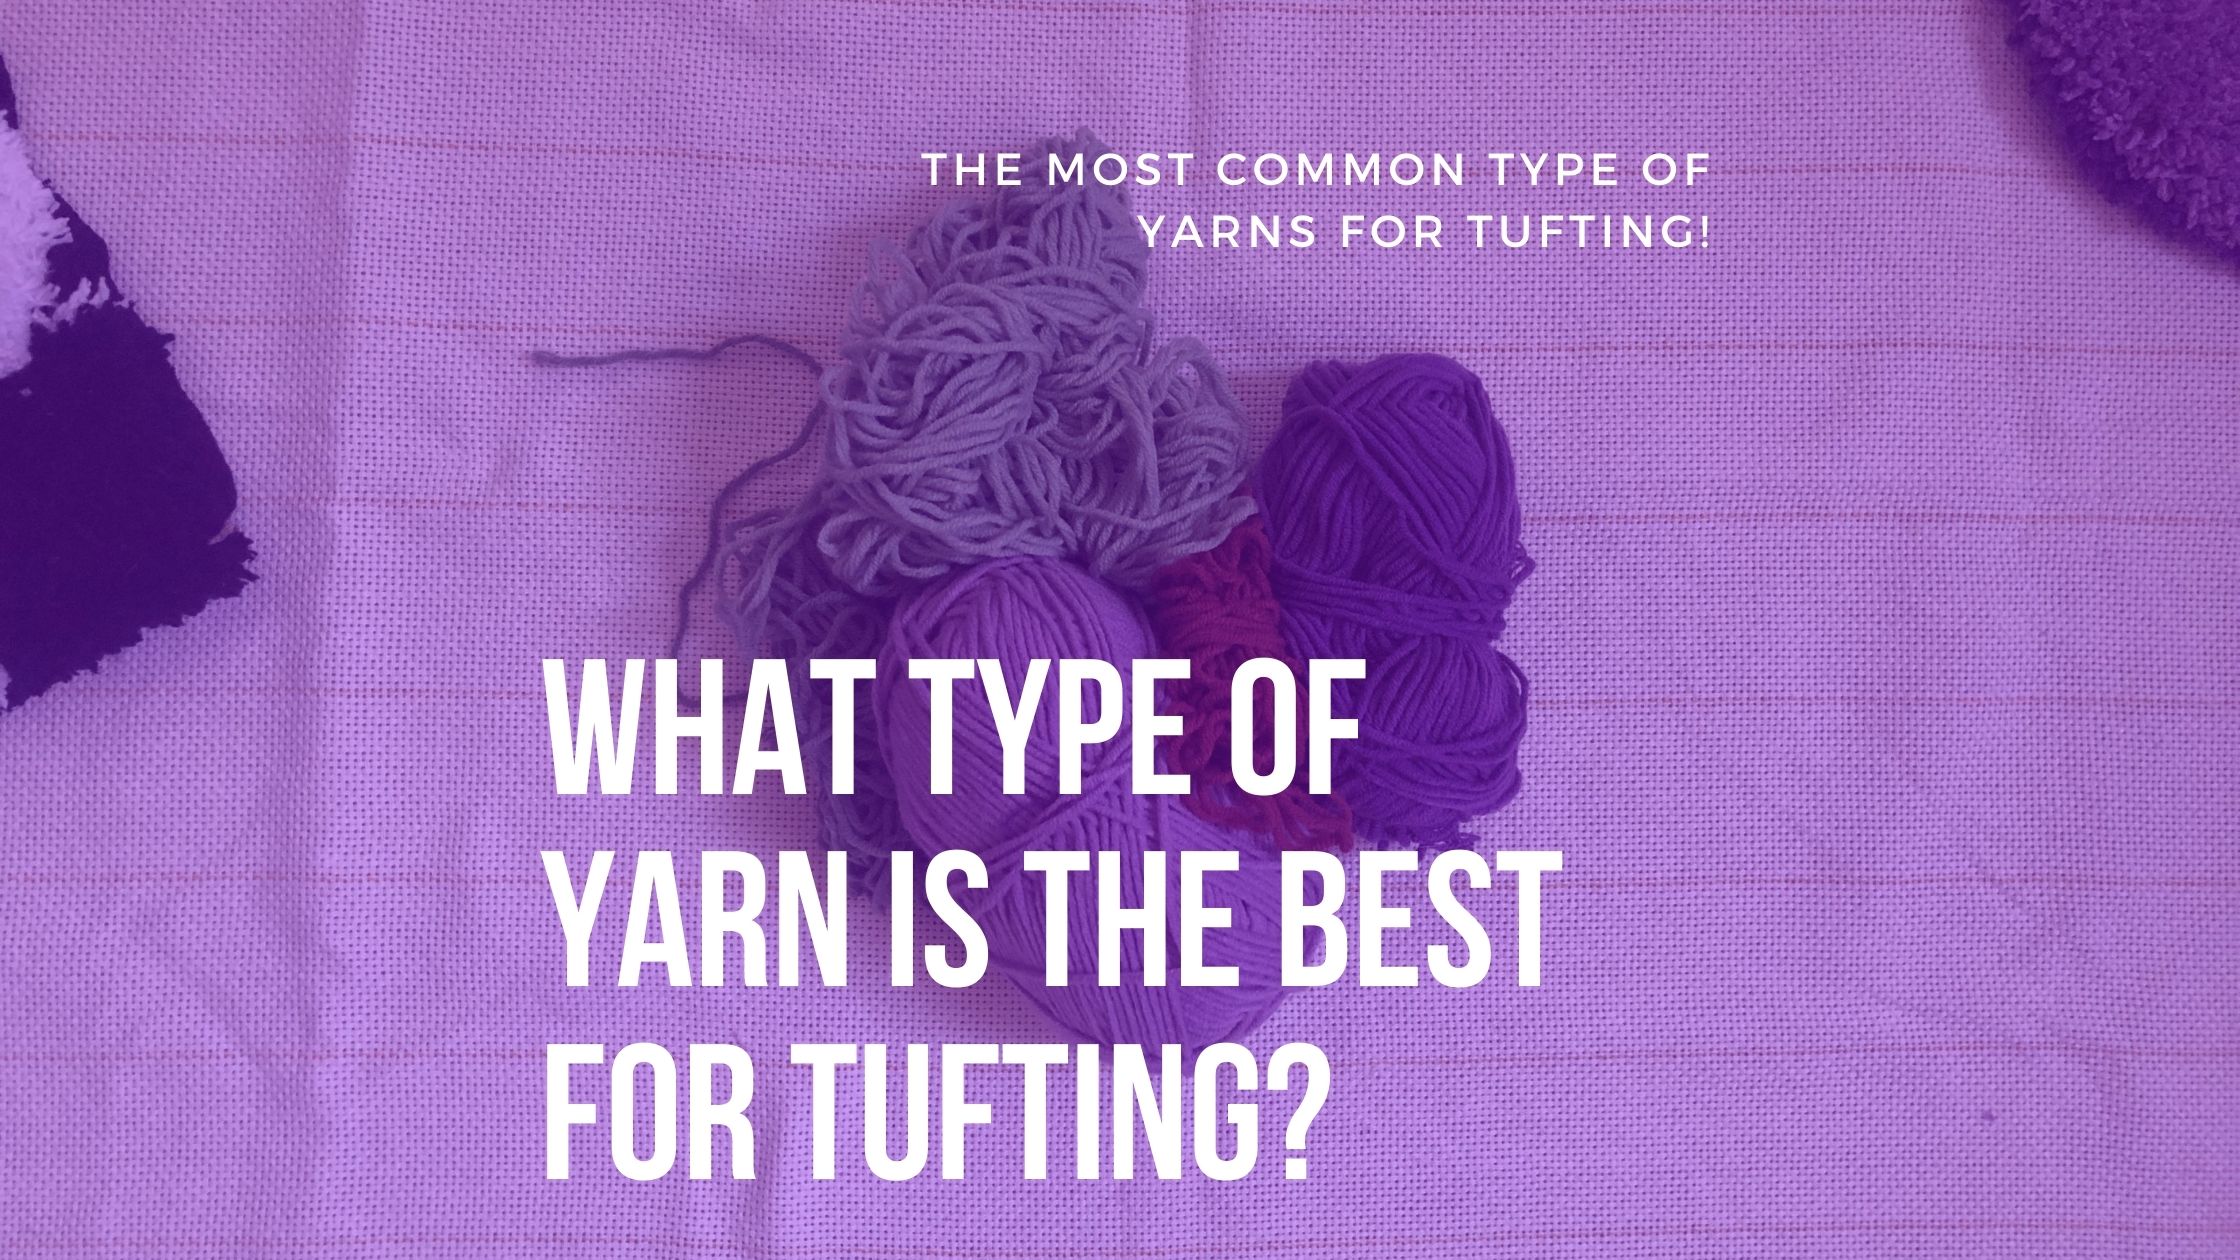 What Type of Yarn is the Best For Tufting?